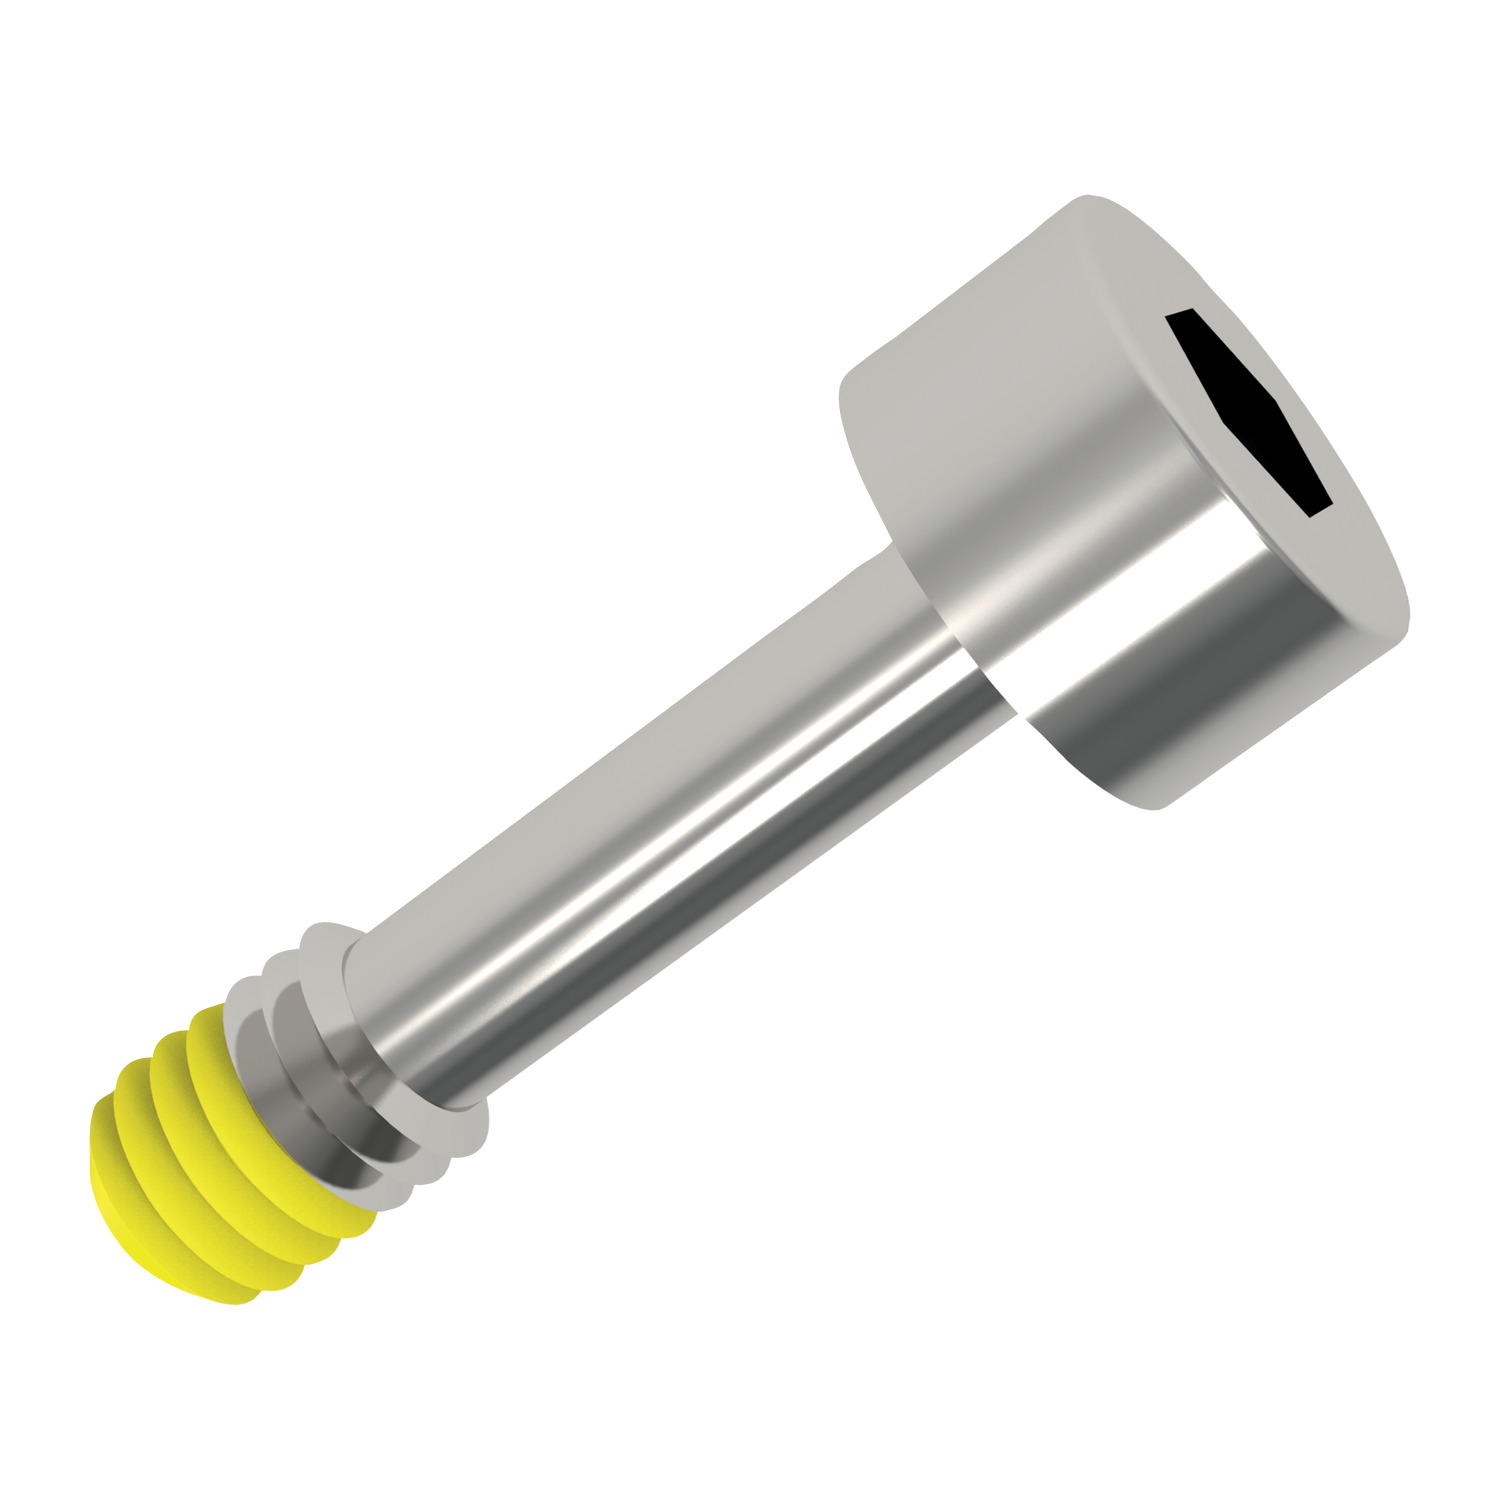 Product P0154.P2, Captive Screws - Cap Head hex drive - 303 stainless - with locking patch / 